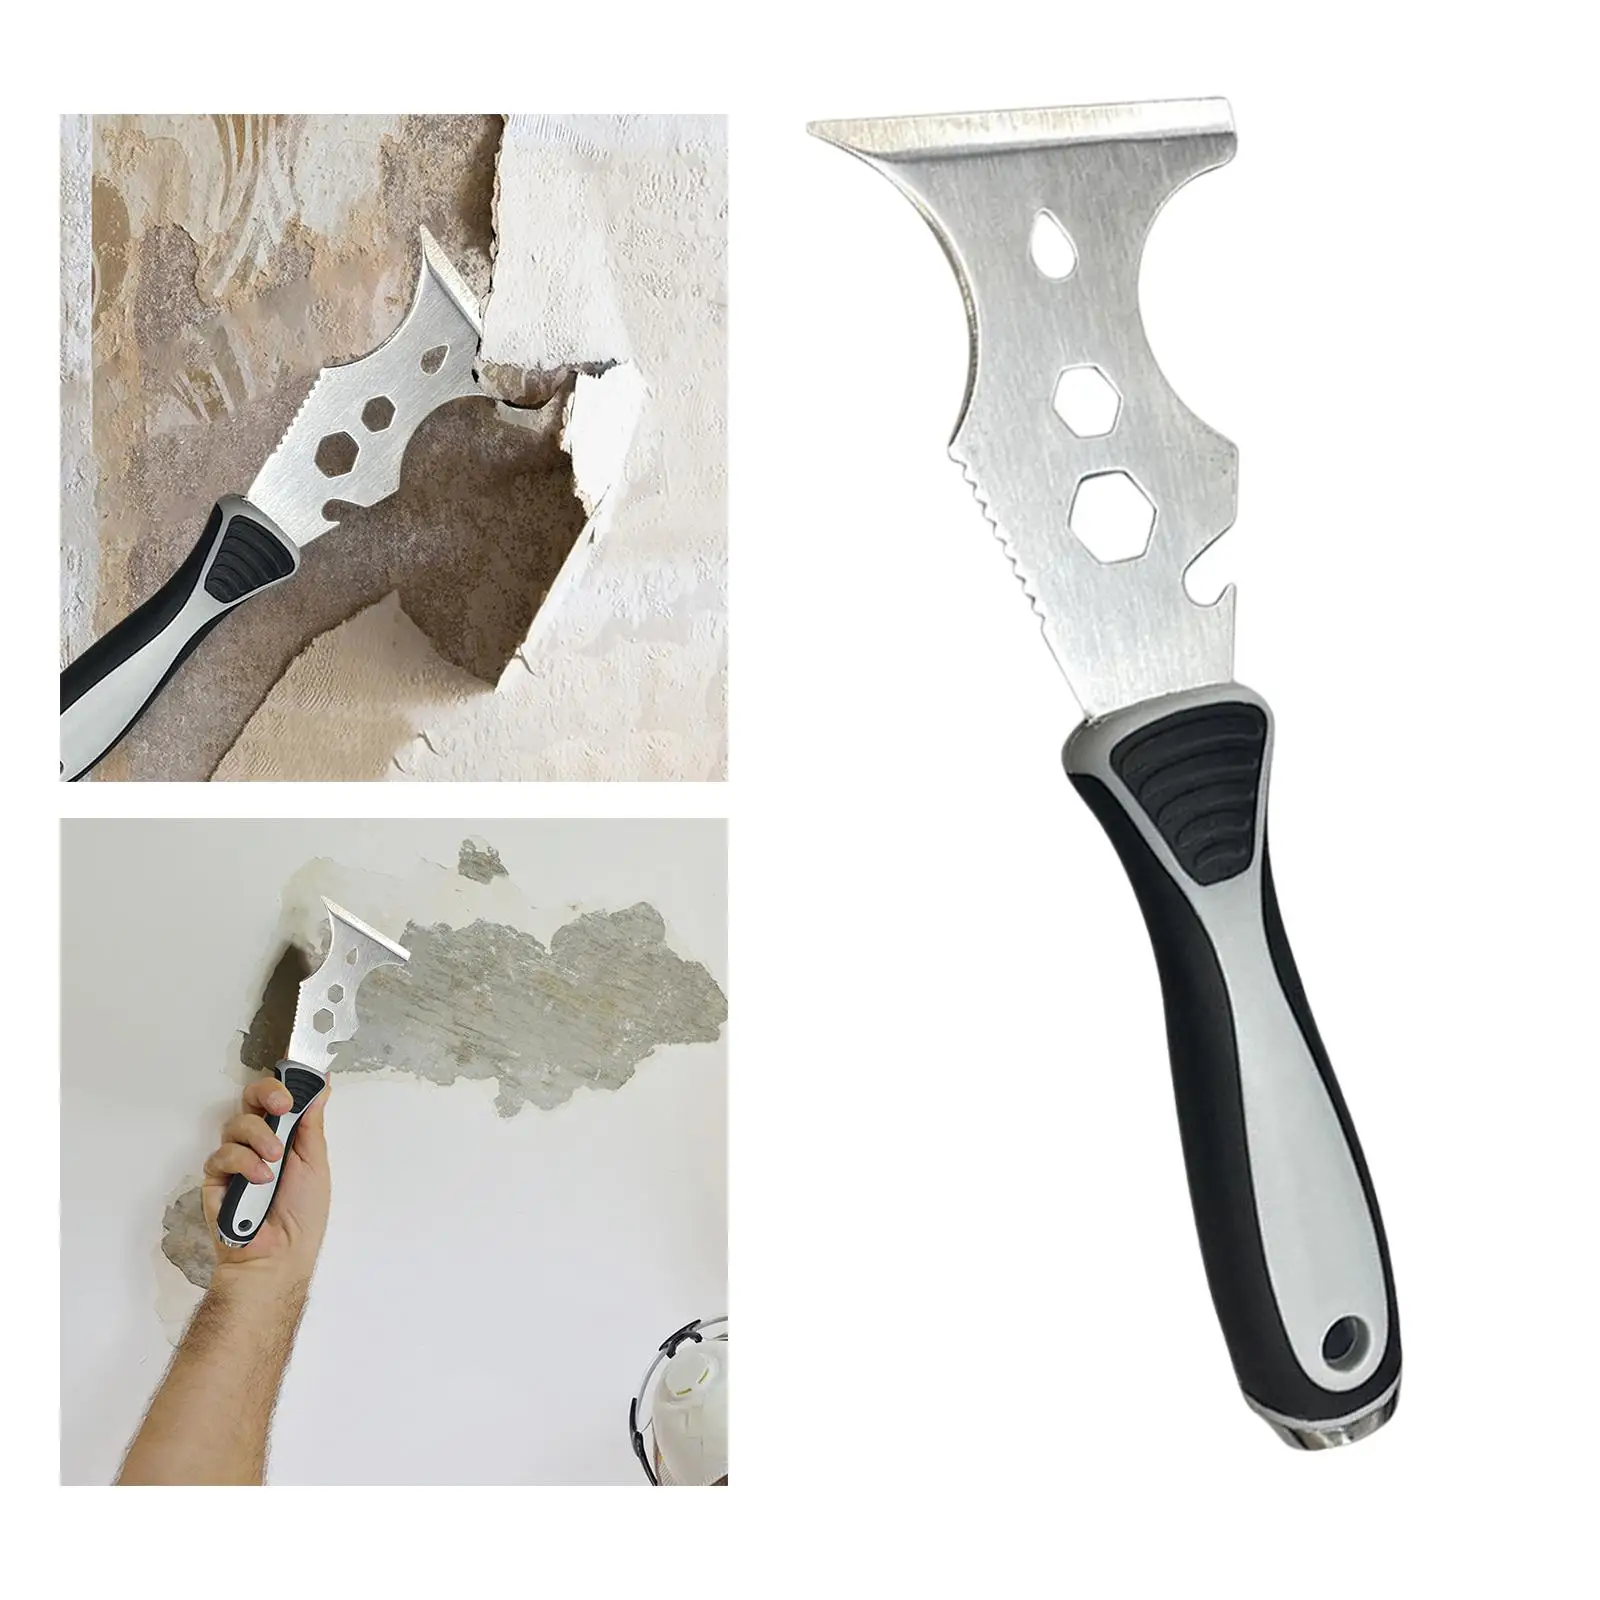 Multi Use Paint Scraper Removal Tool Paint Remover Painting Tools Professional Putty Knife for Home Decoration Repair